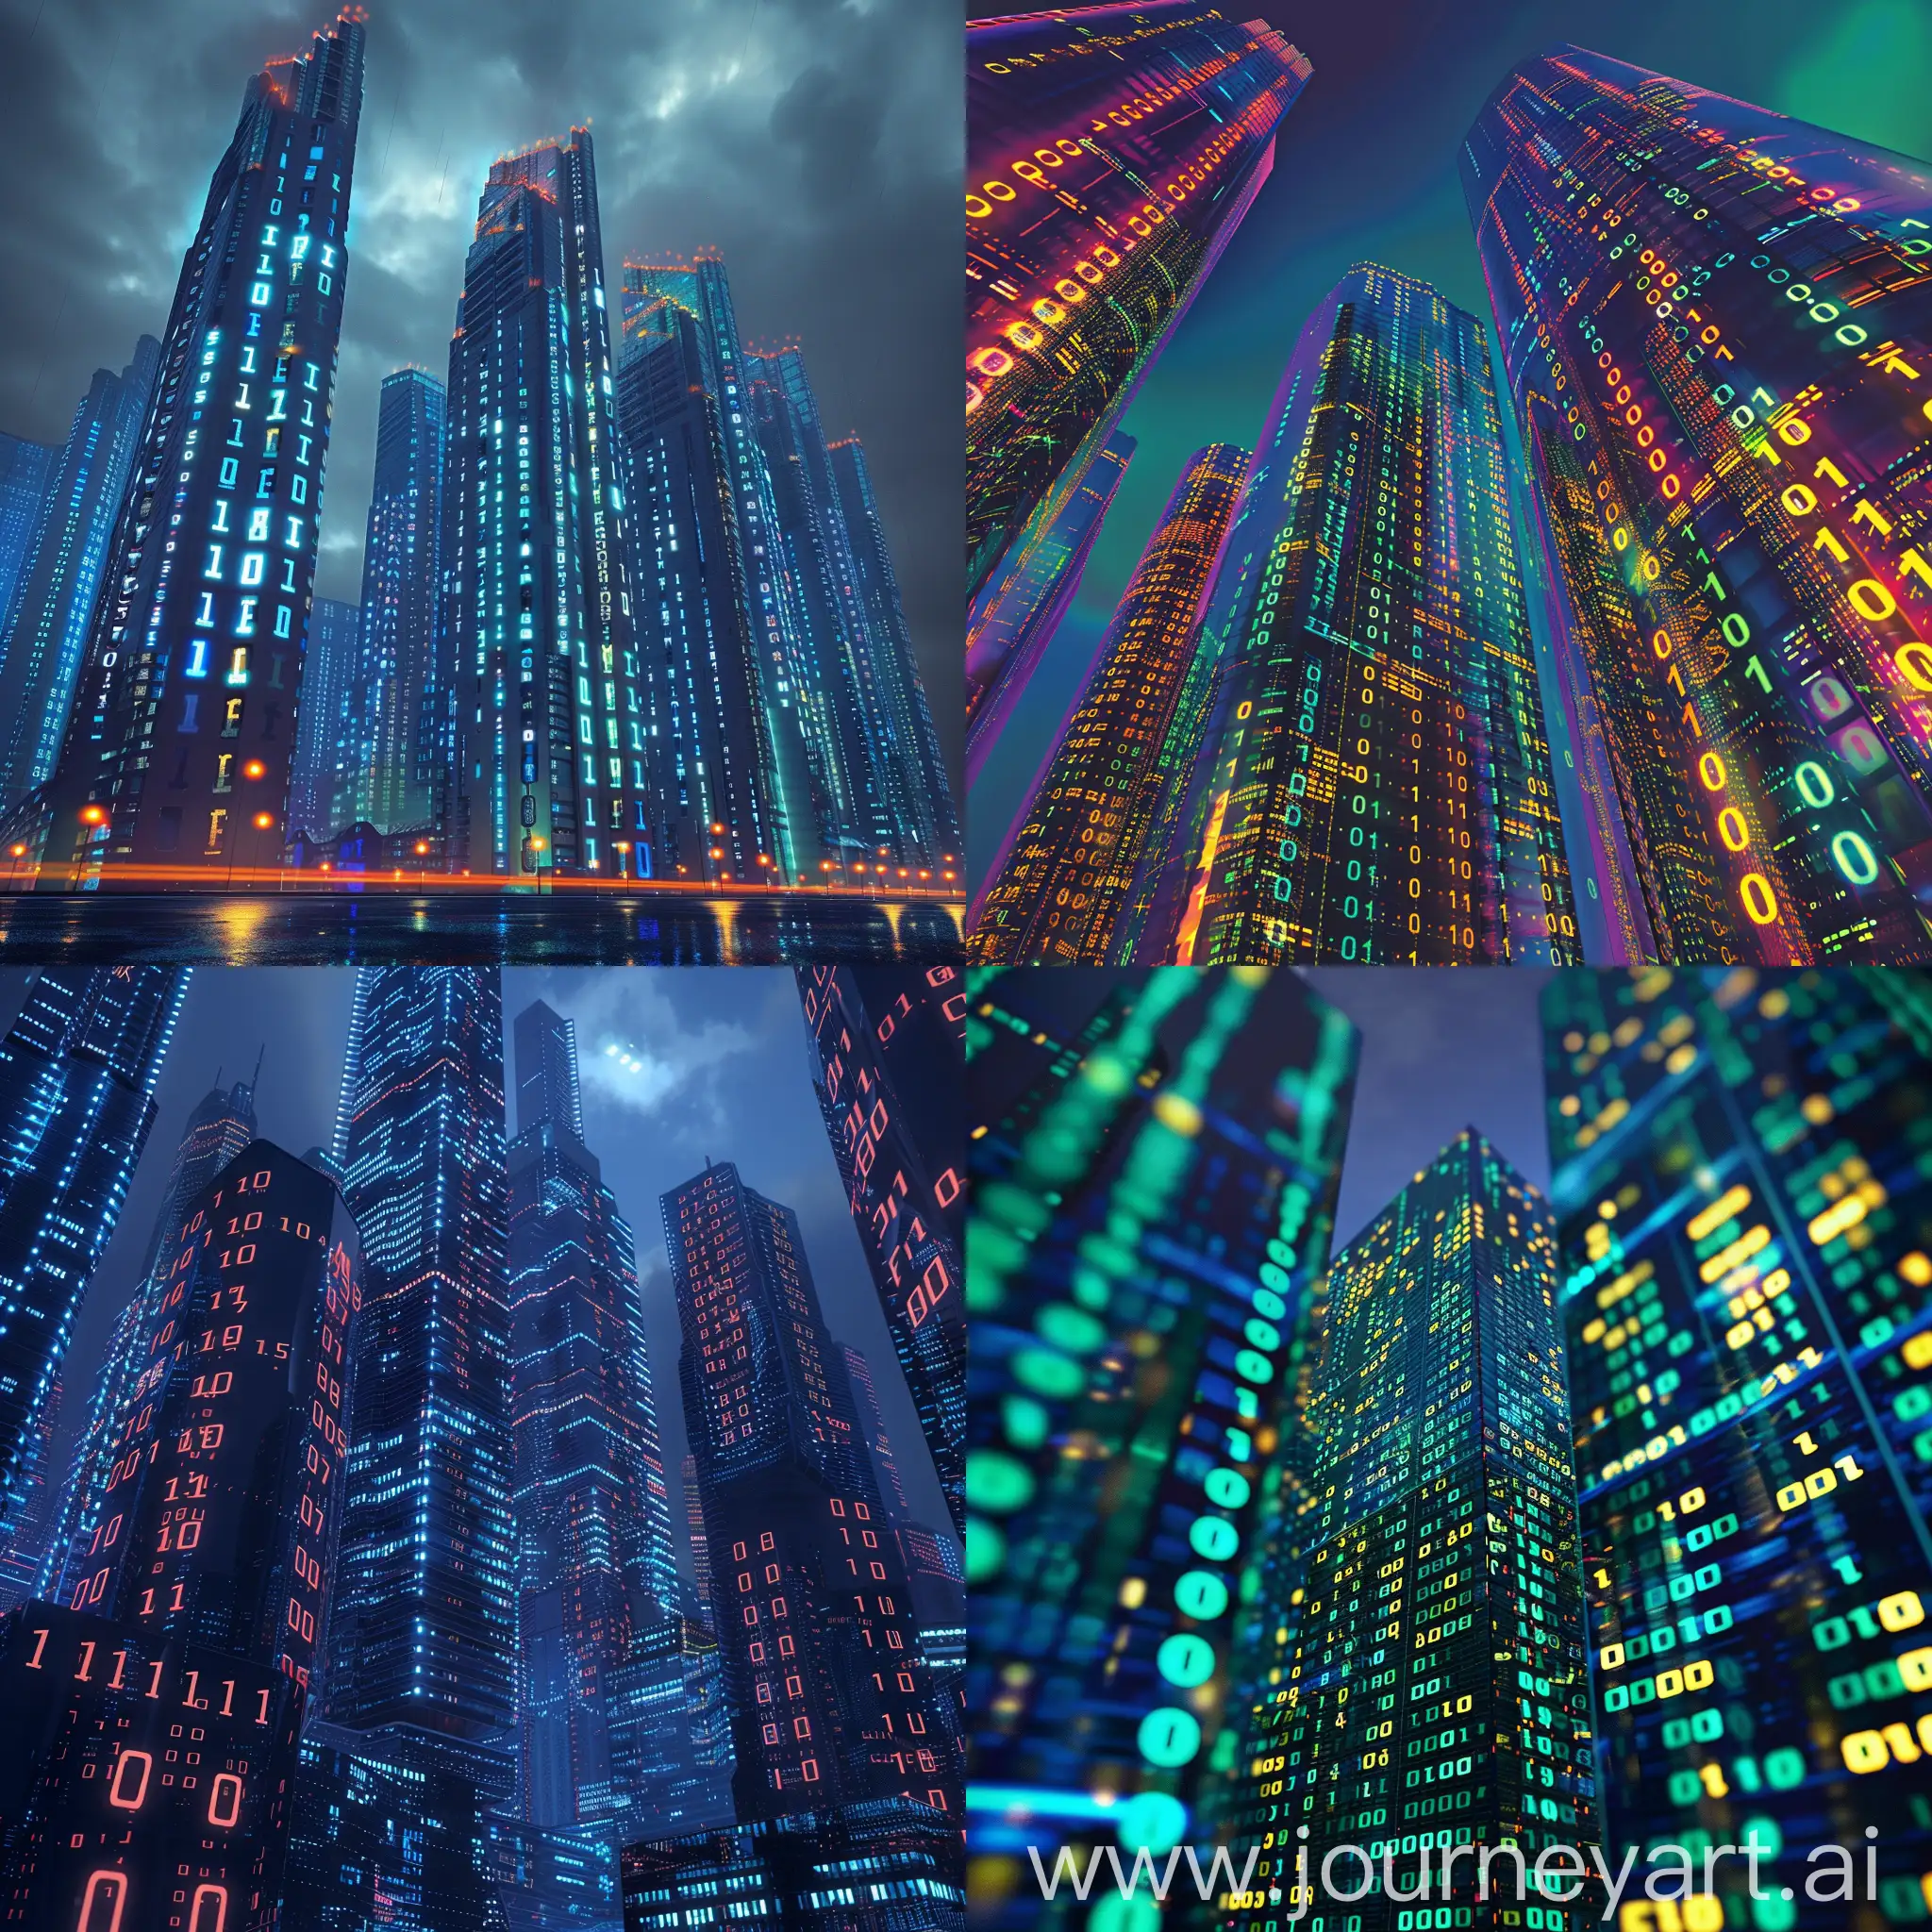 create an image of cyberpunk style buildings where they resemble computers displaying binary codes